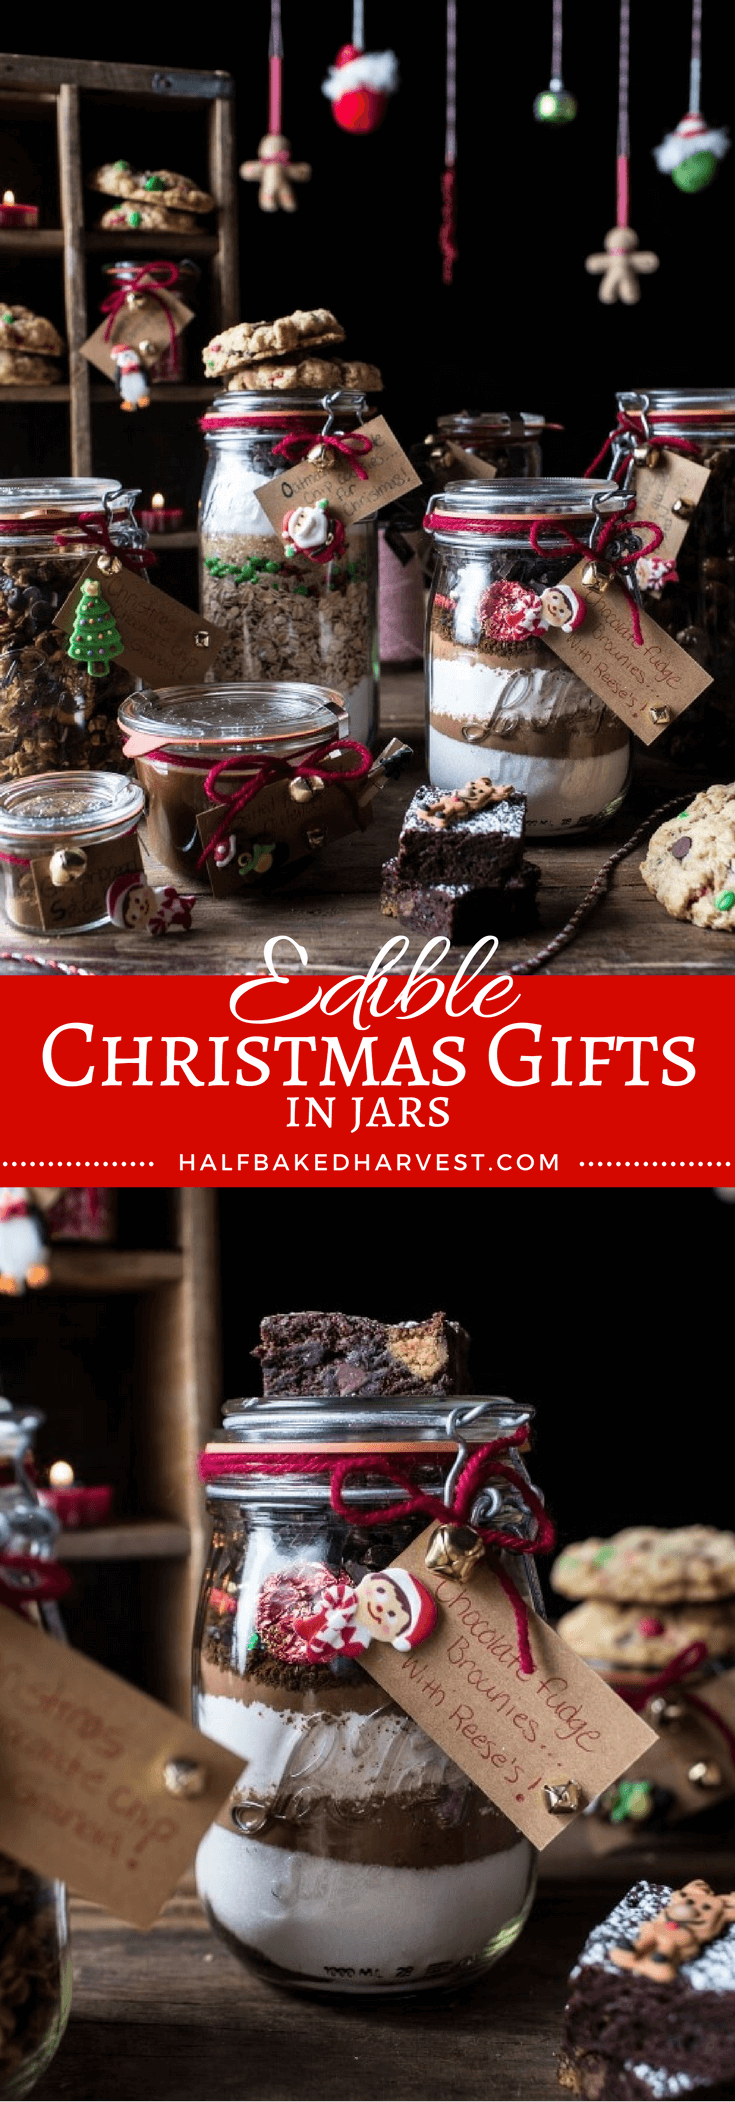 The perfect edible Christmas Gifts in Jars | halfbakedharvest.com @hbharvest